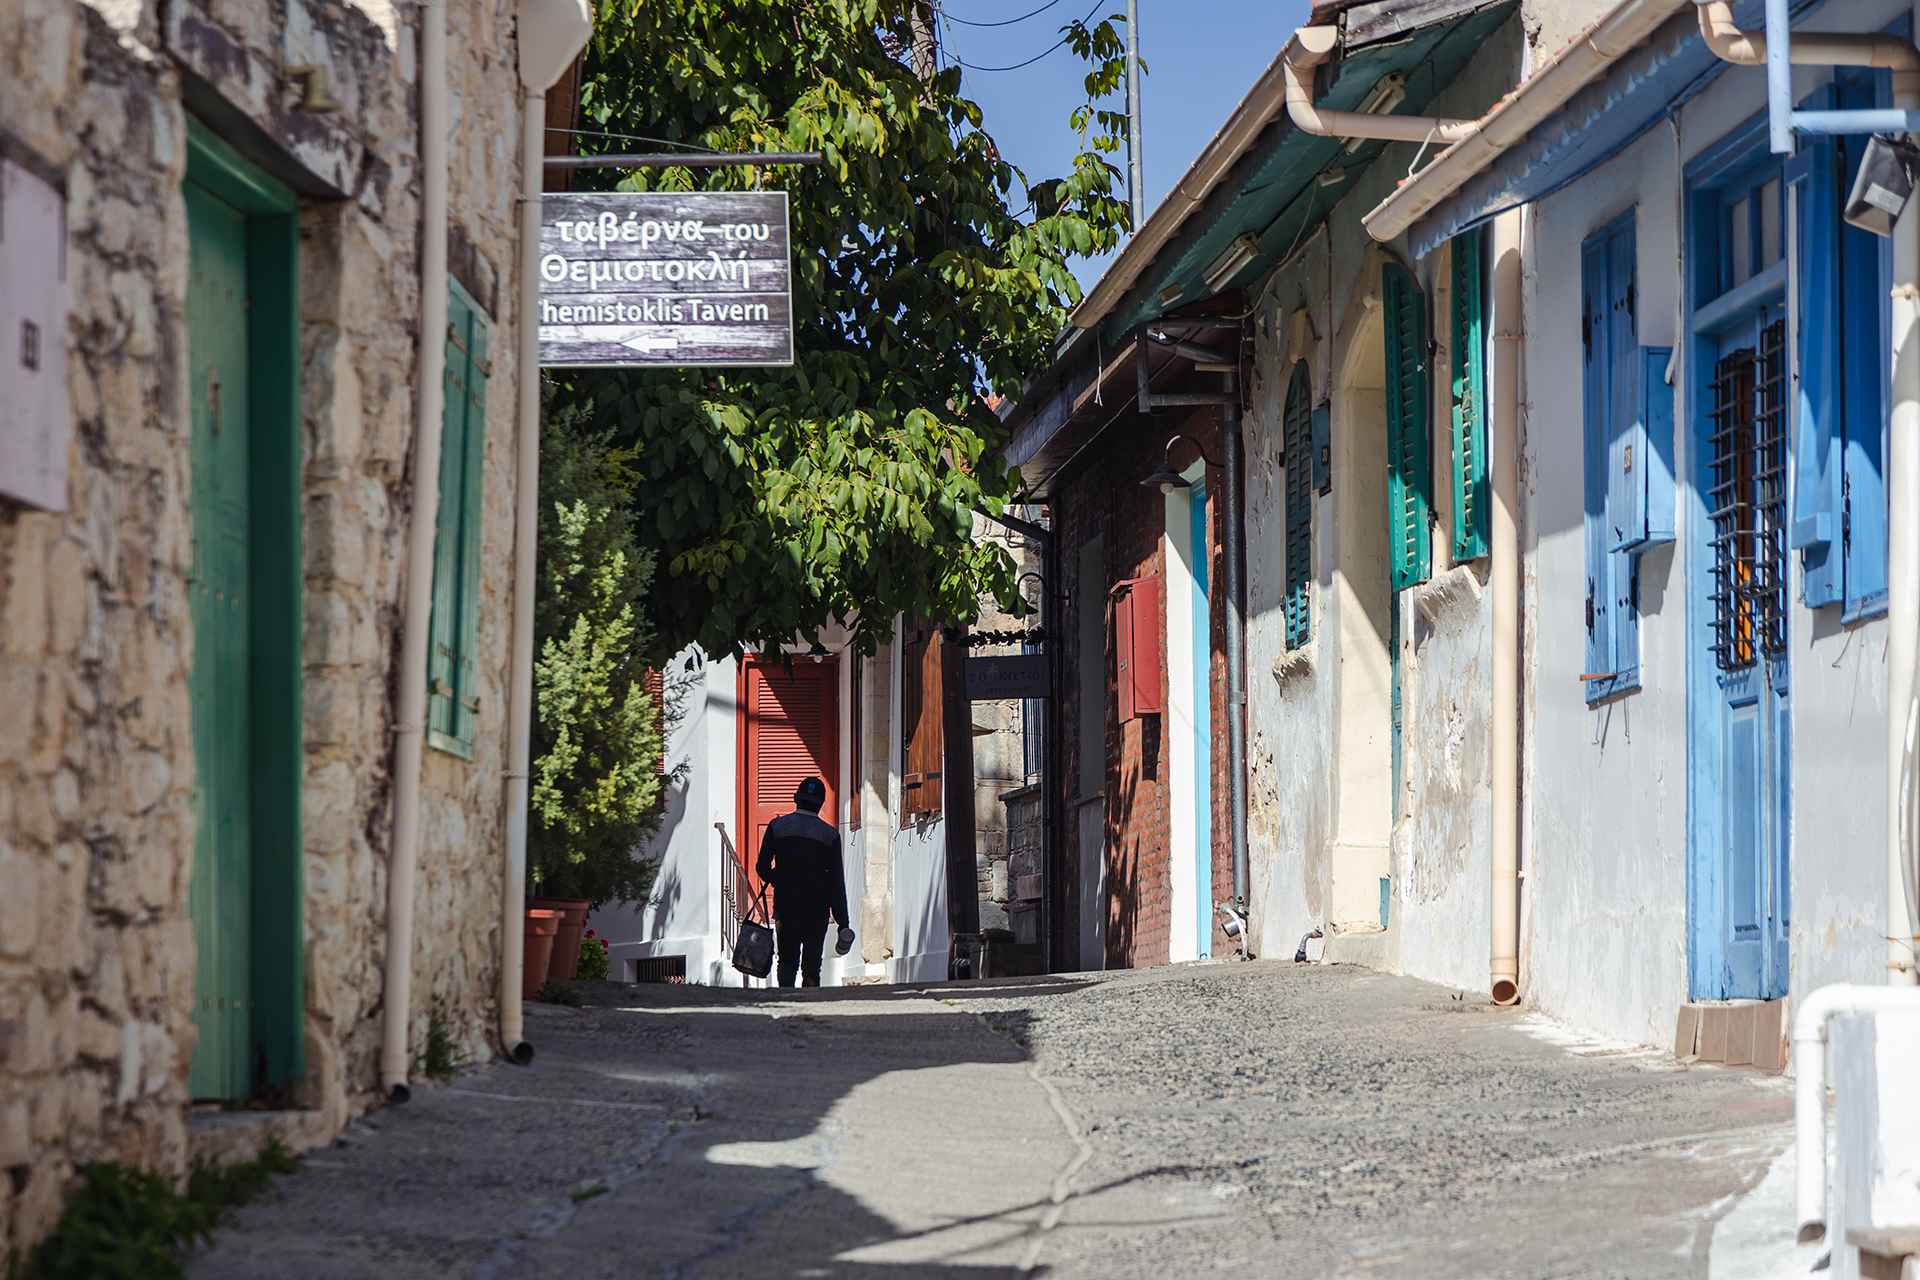 Omodos village is a picturesque gem, boasting charming tiny alleys that add to its unique beauty